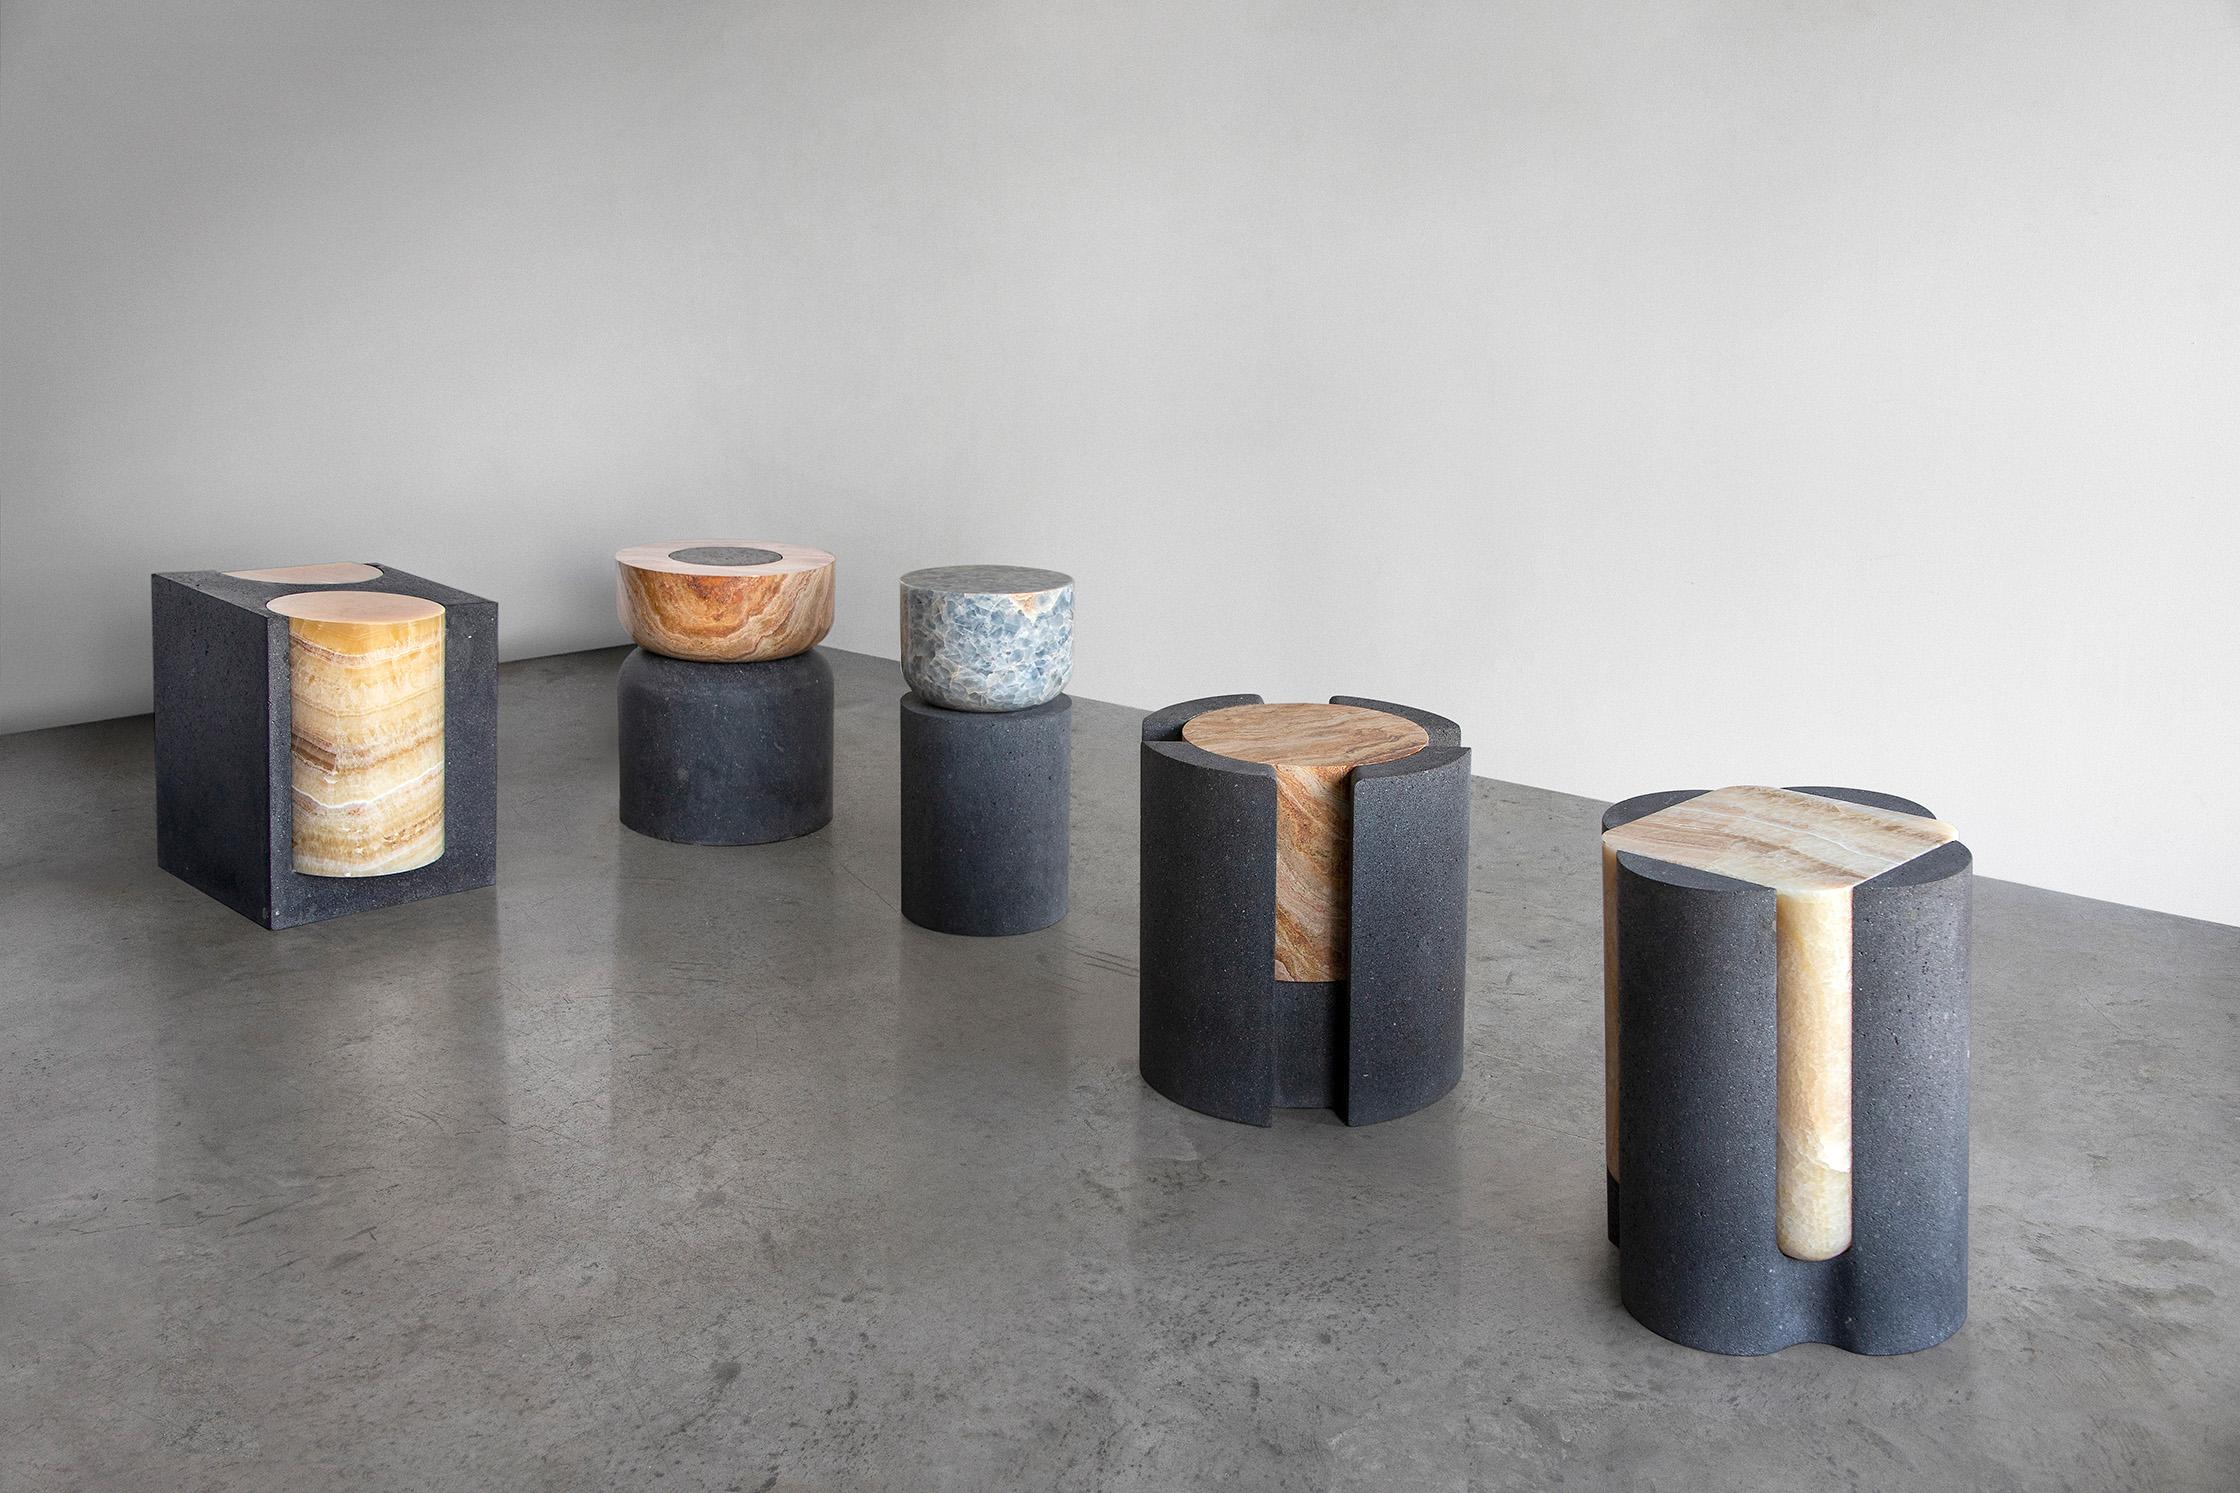 Organic Modern Volcanic Shade V Stool/Table by Sten Studio, Represented by Tuleste Factory